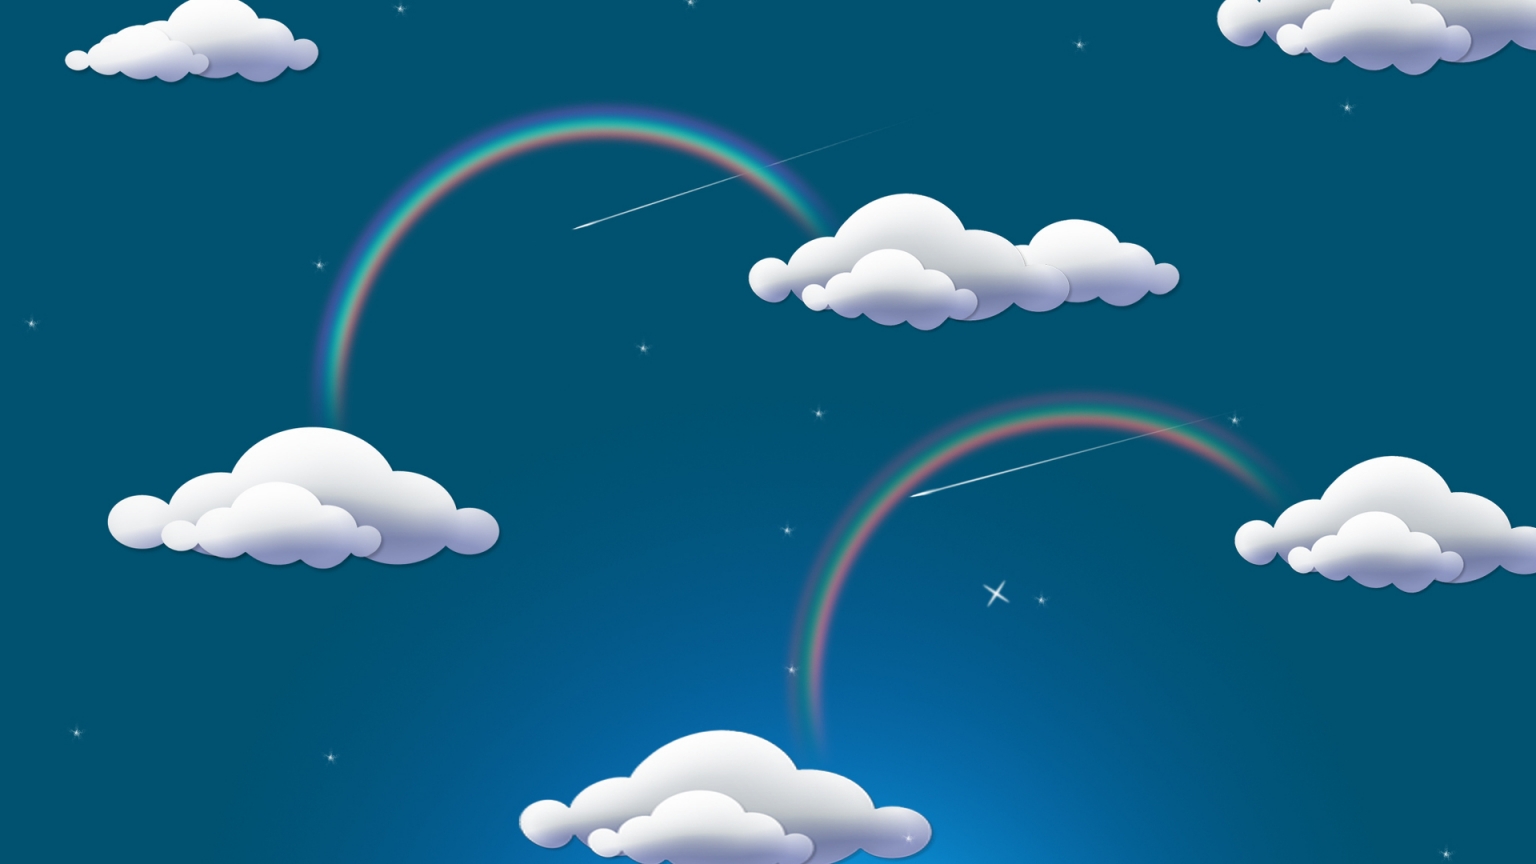 Rainbow and Clouds for 1536 x 864 HDTV resolution